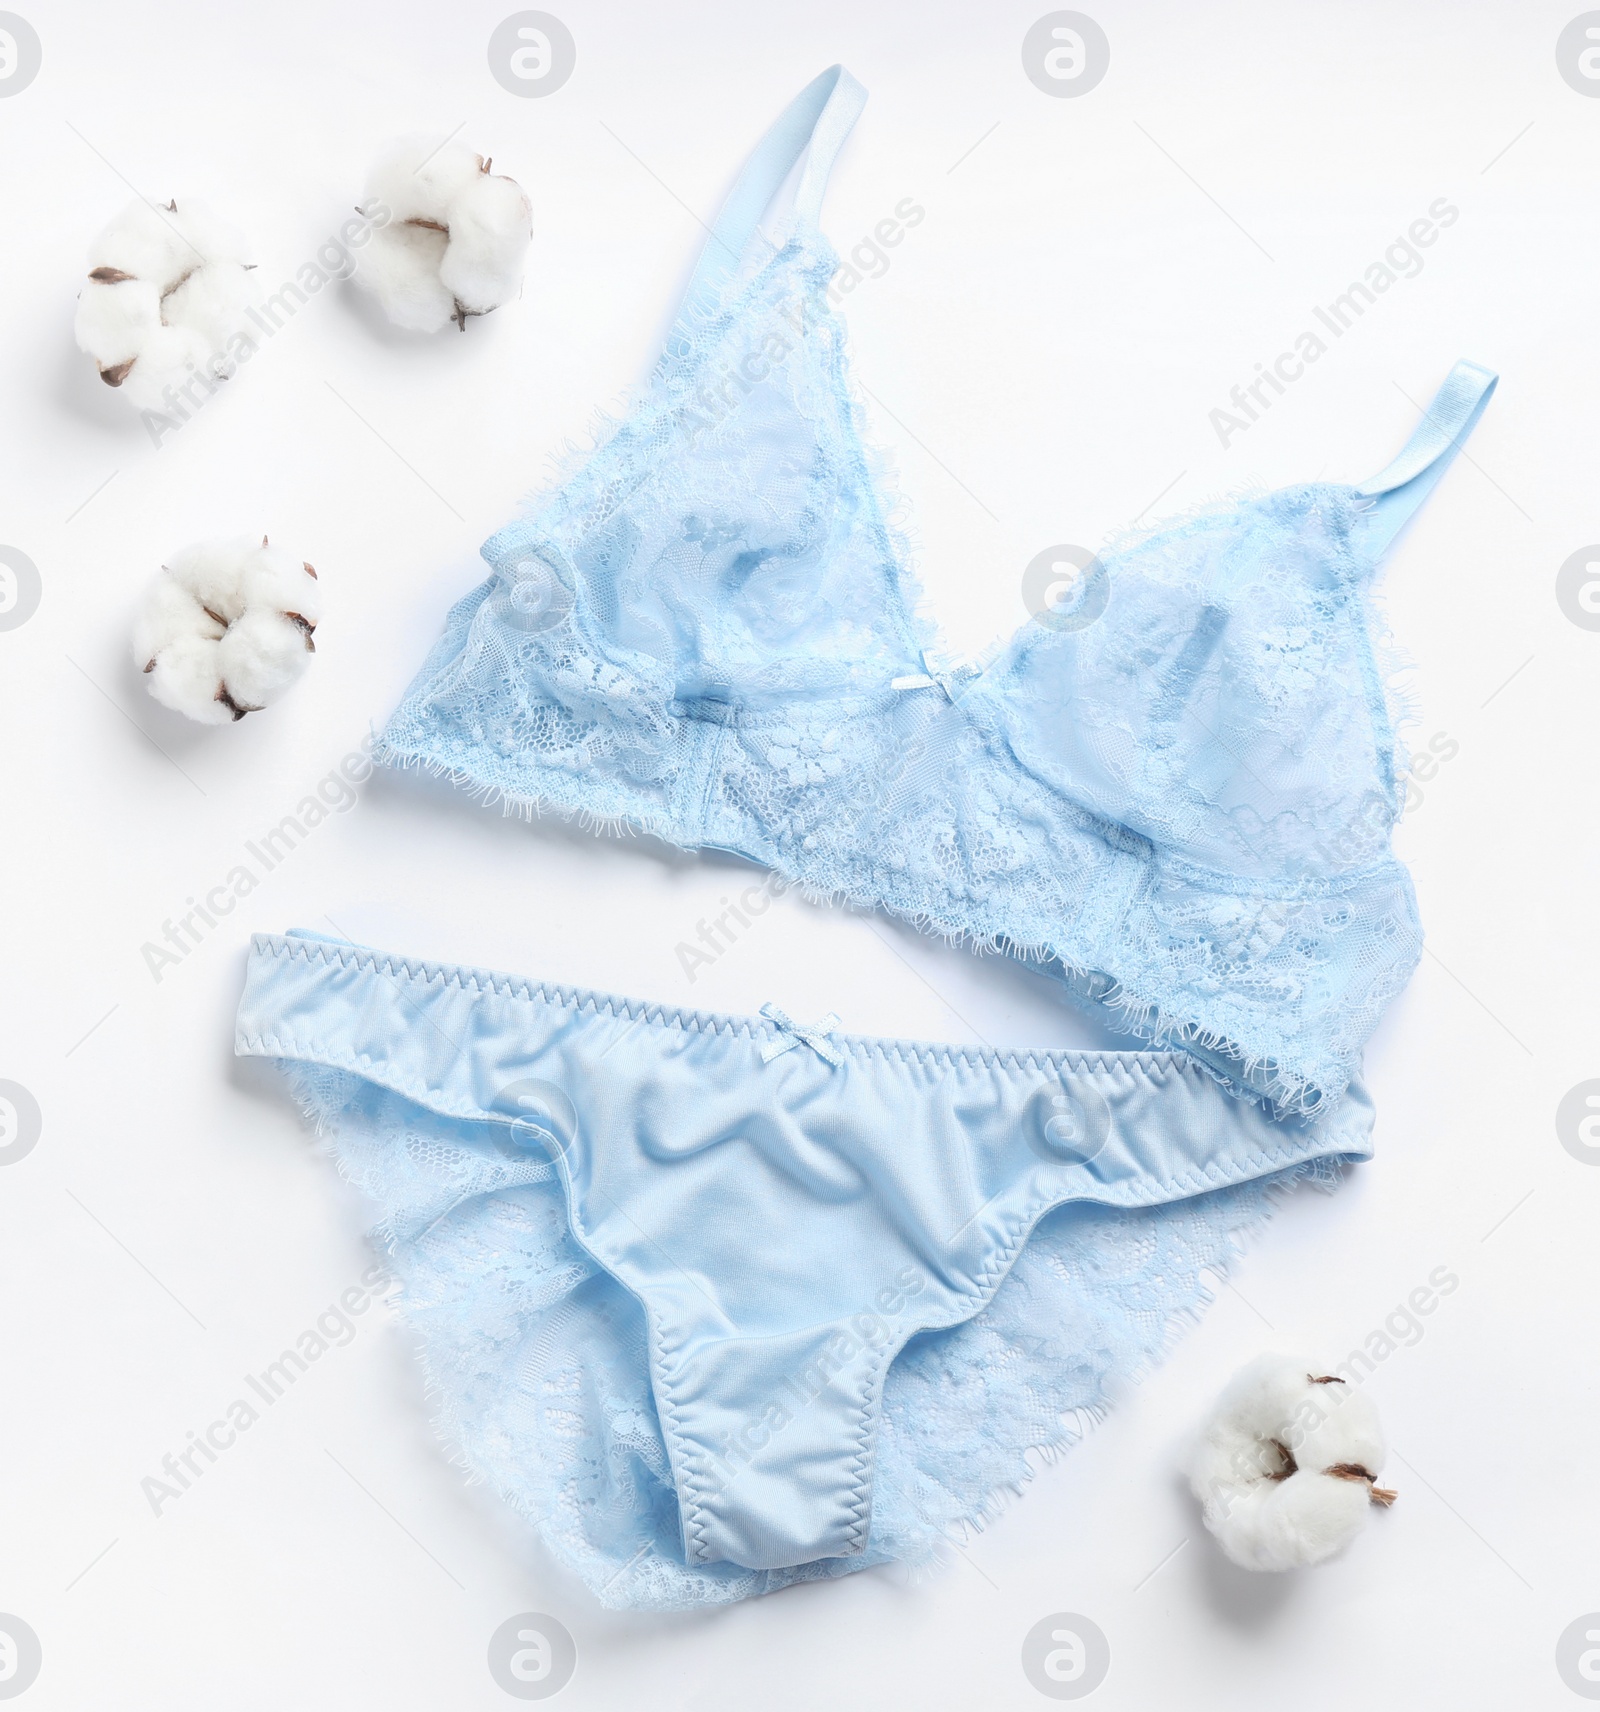 Photo of Sexy women's underwear and cotton flowers on white background, top view